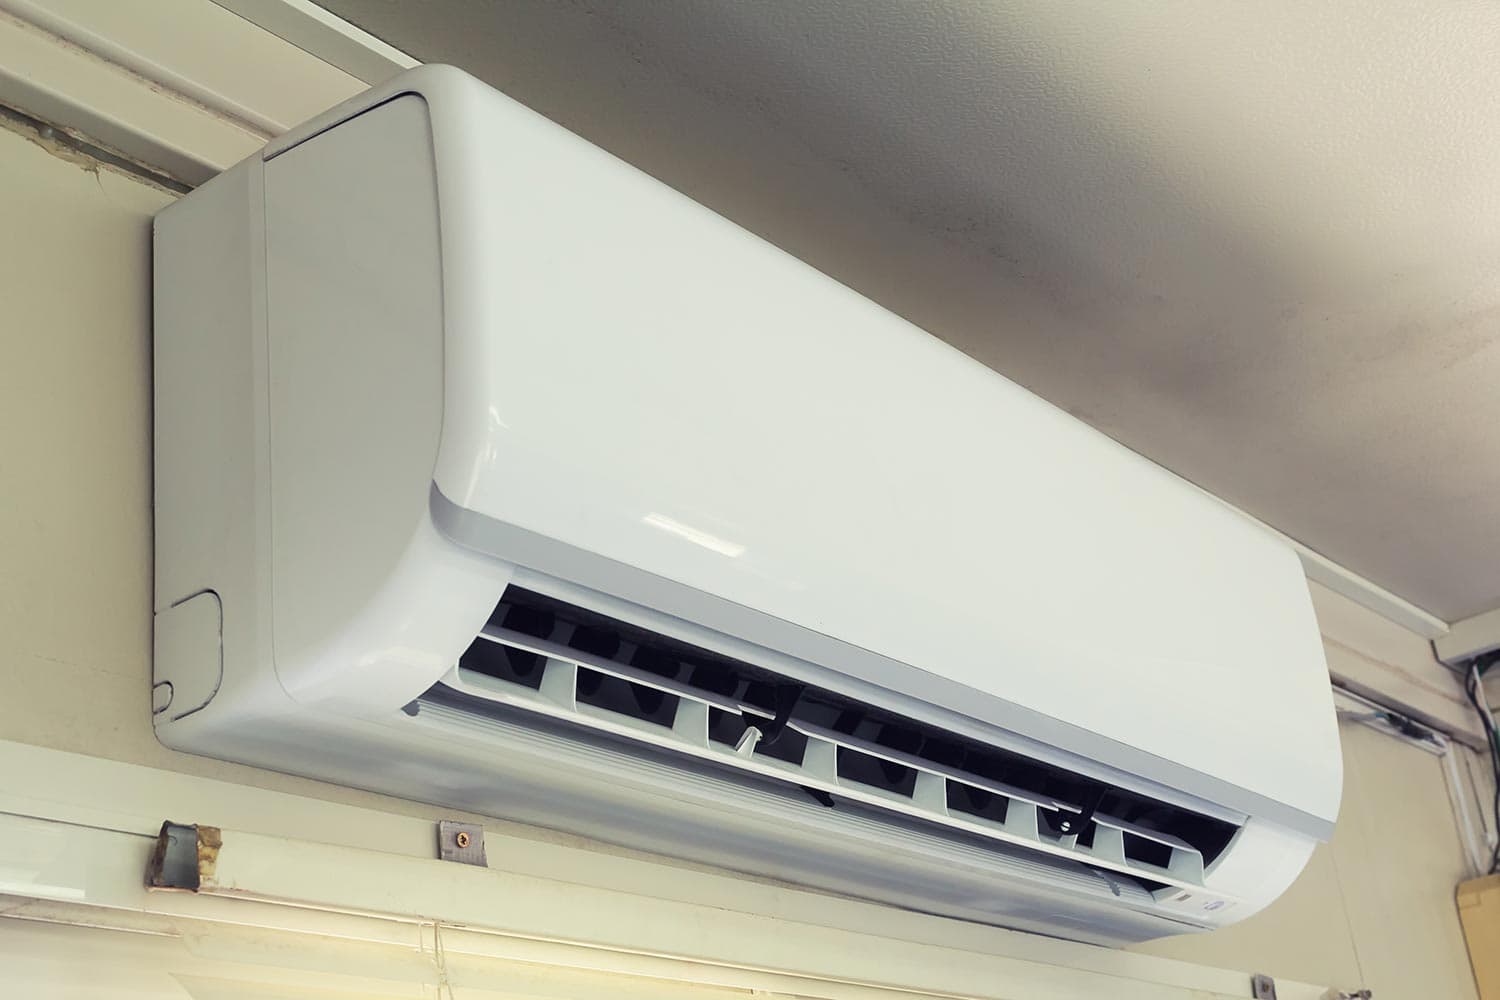 Air conditioner (AC) indoor unit or evaporator and wall-mounted